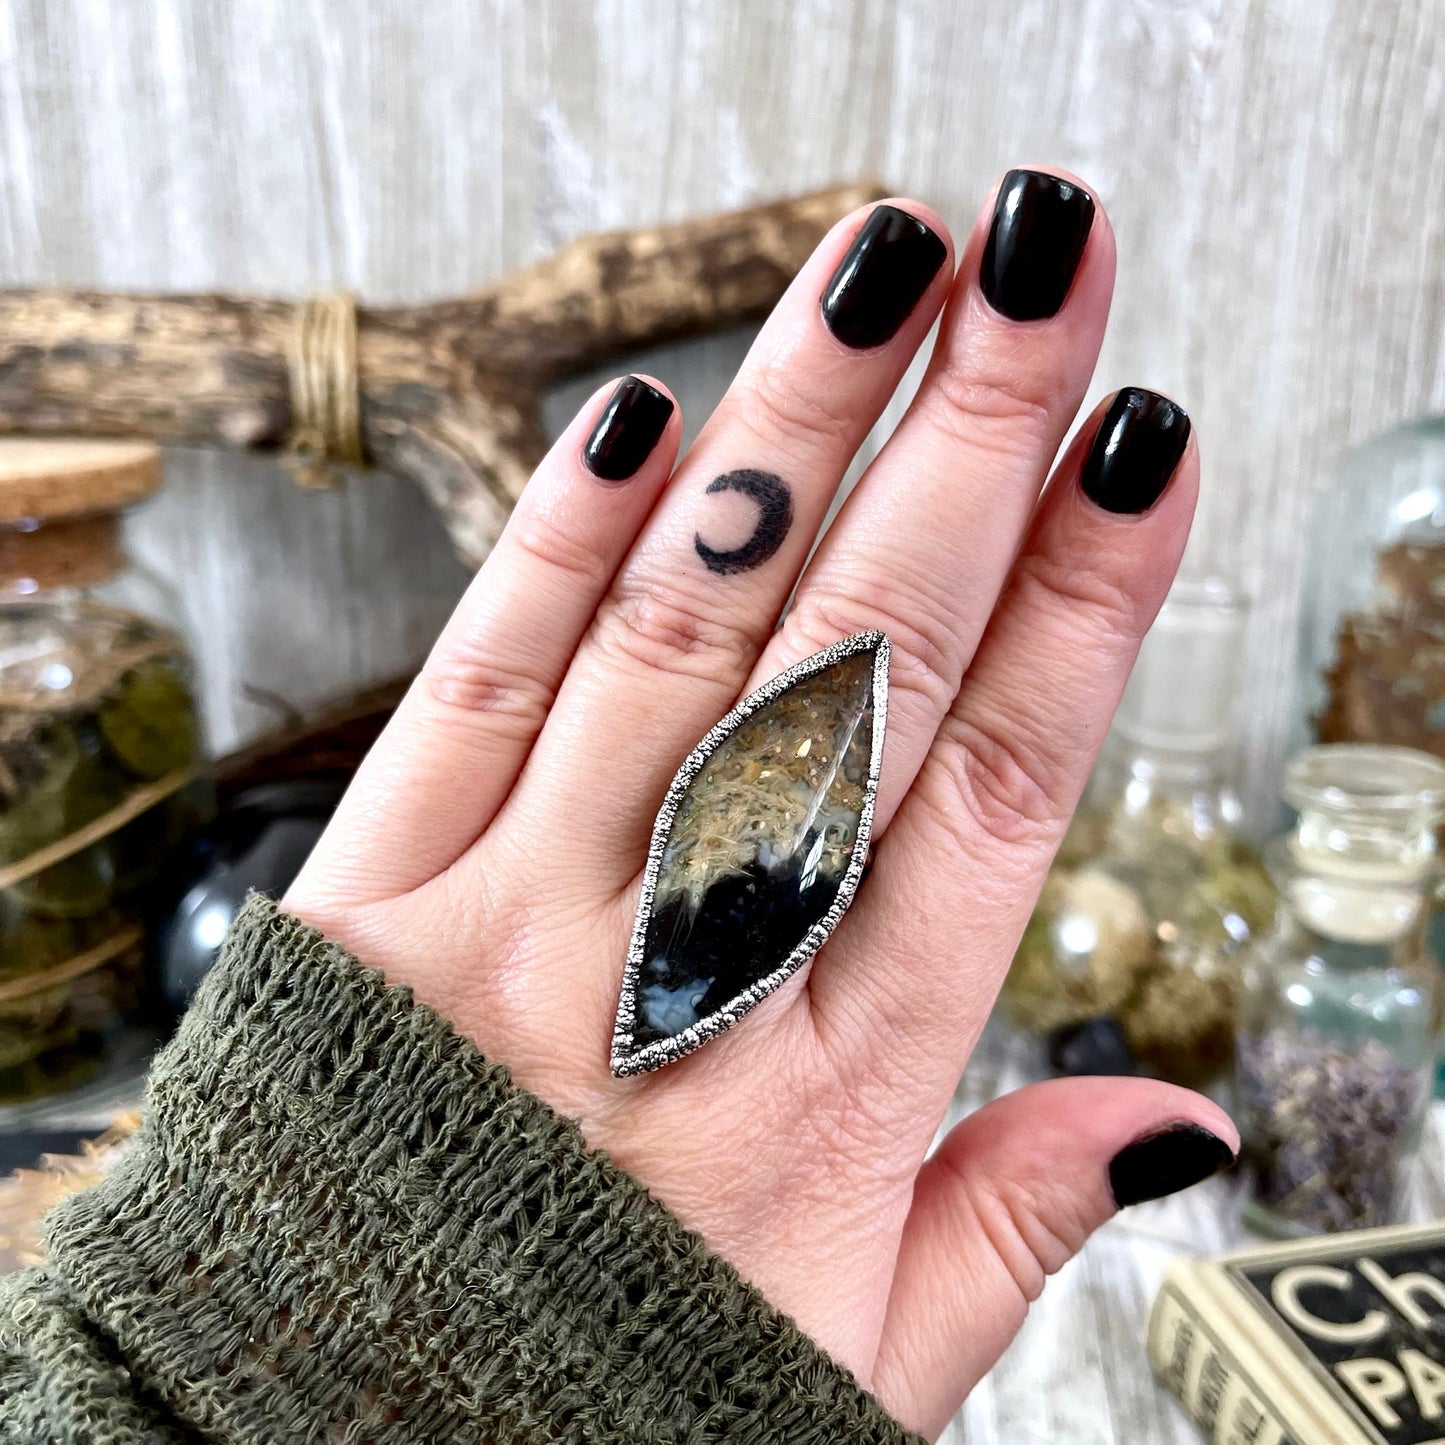 Big Bold Jewelry, Big Crystal Ring, Big Silver Ring, Big Stone Ring, Etsy ID: 1414498699, Fossilized Palm Root, FOXLARK- RINGS, Jewelry, Large Boho Ring, Large Crystal Ring, Large Stone Ring, Natural stone ring, Rings, silver crystal ring, Silver Stone Je